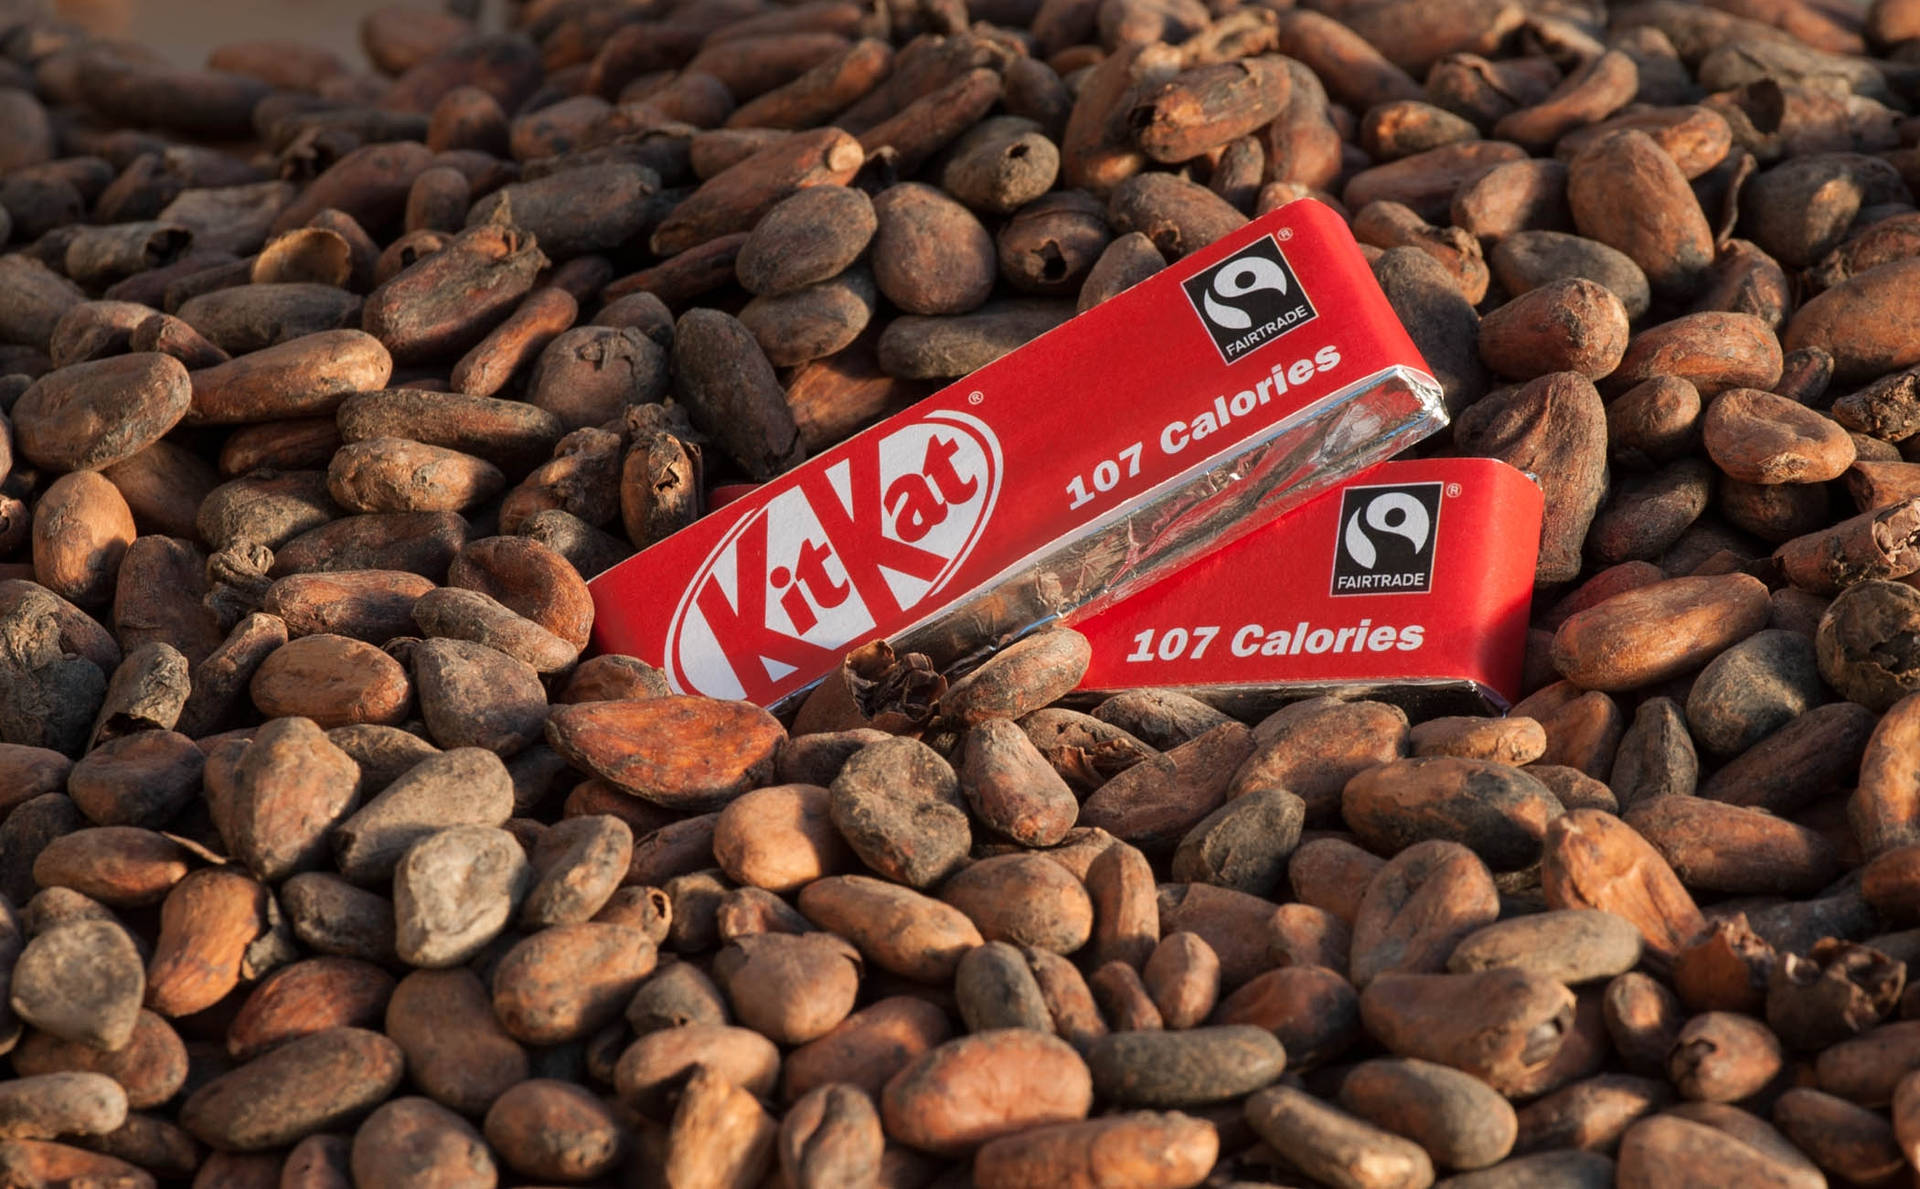 Kit Kat And Cacao Seeds Wallpaper